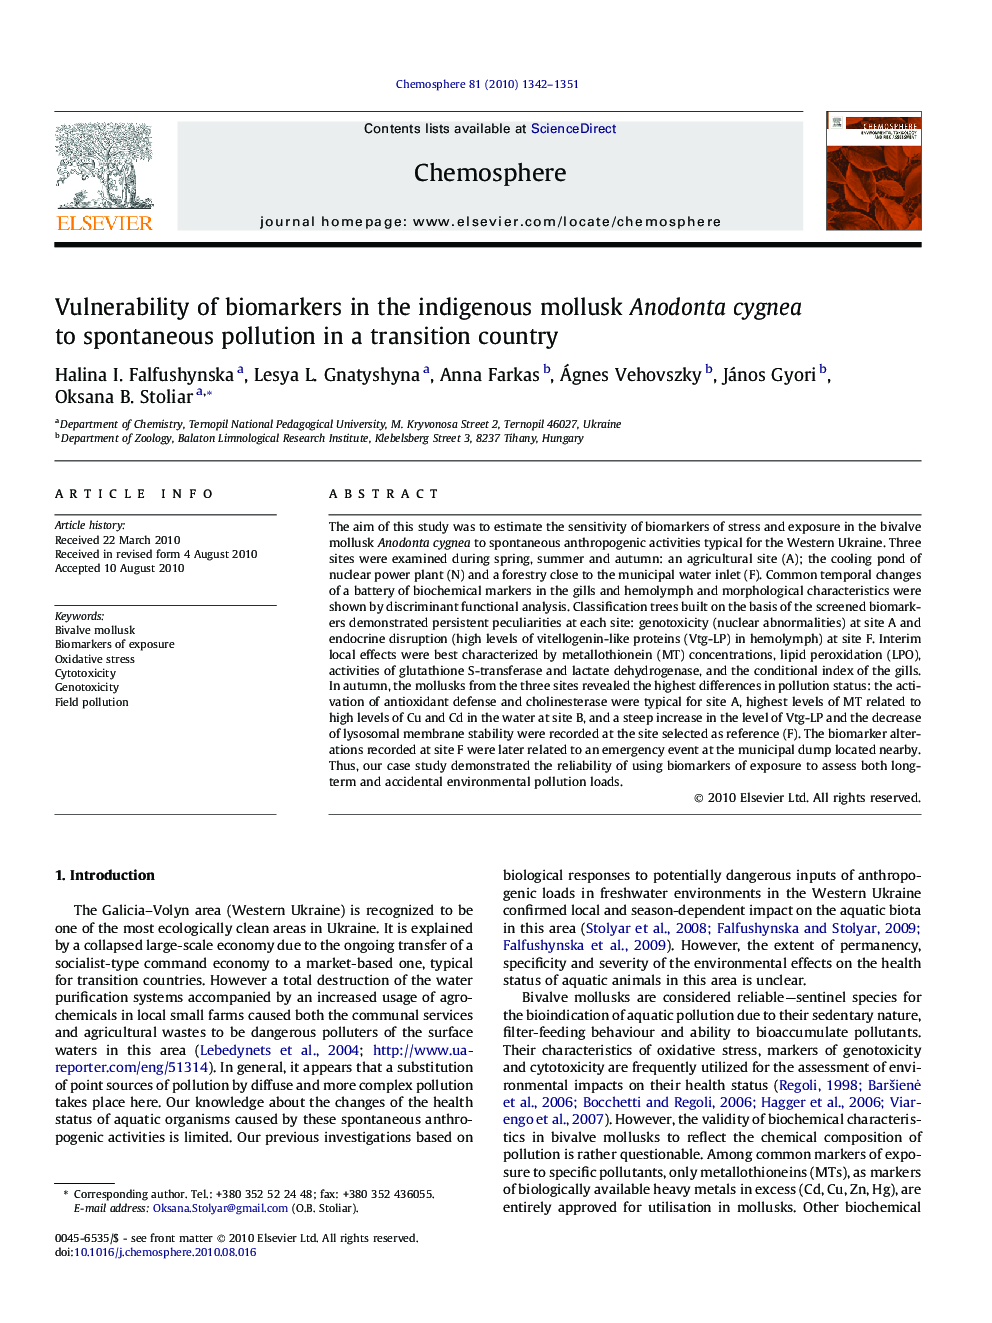 Vulnerability of biomarkers in the indigenous mollusk Anodonta cygnea to spontaneous pollution in a transition country